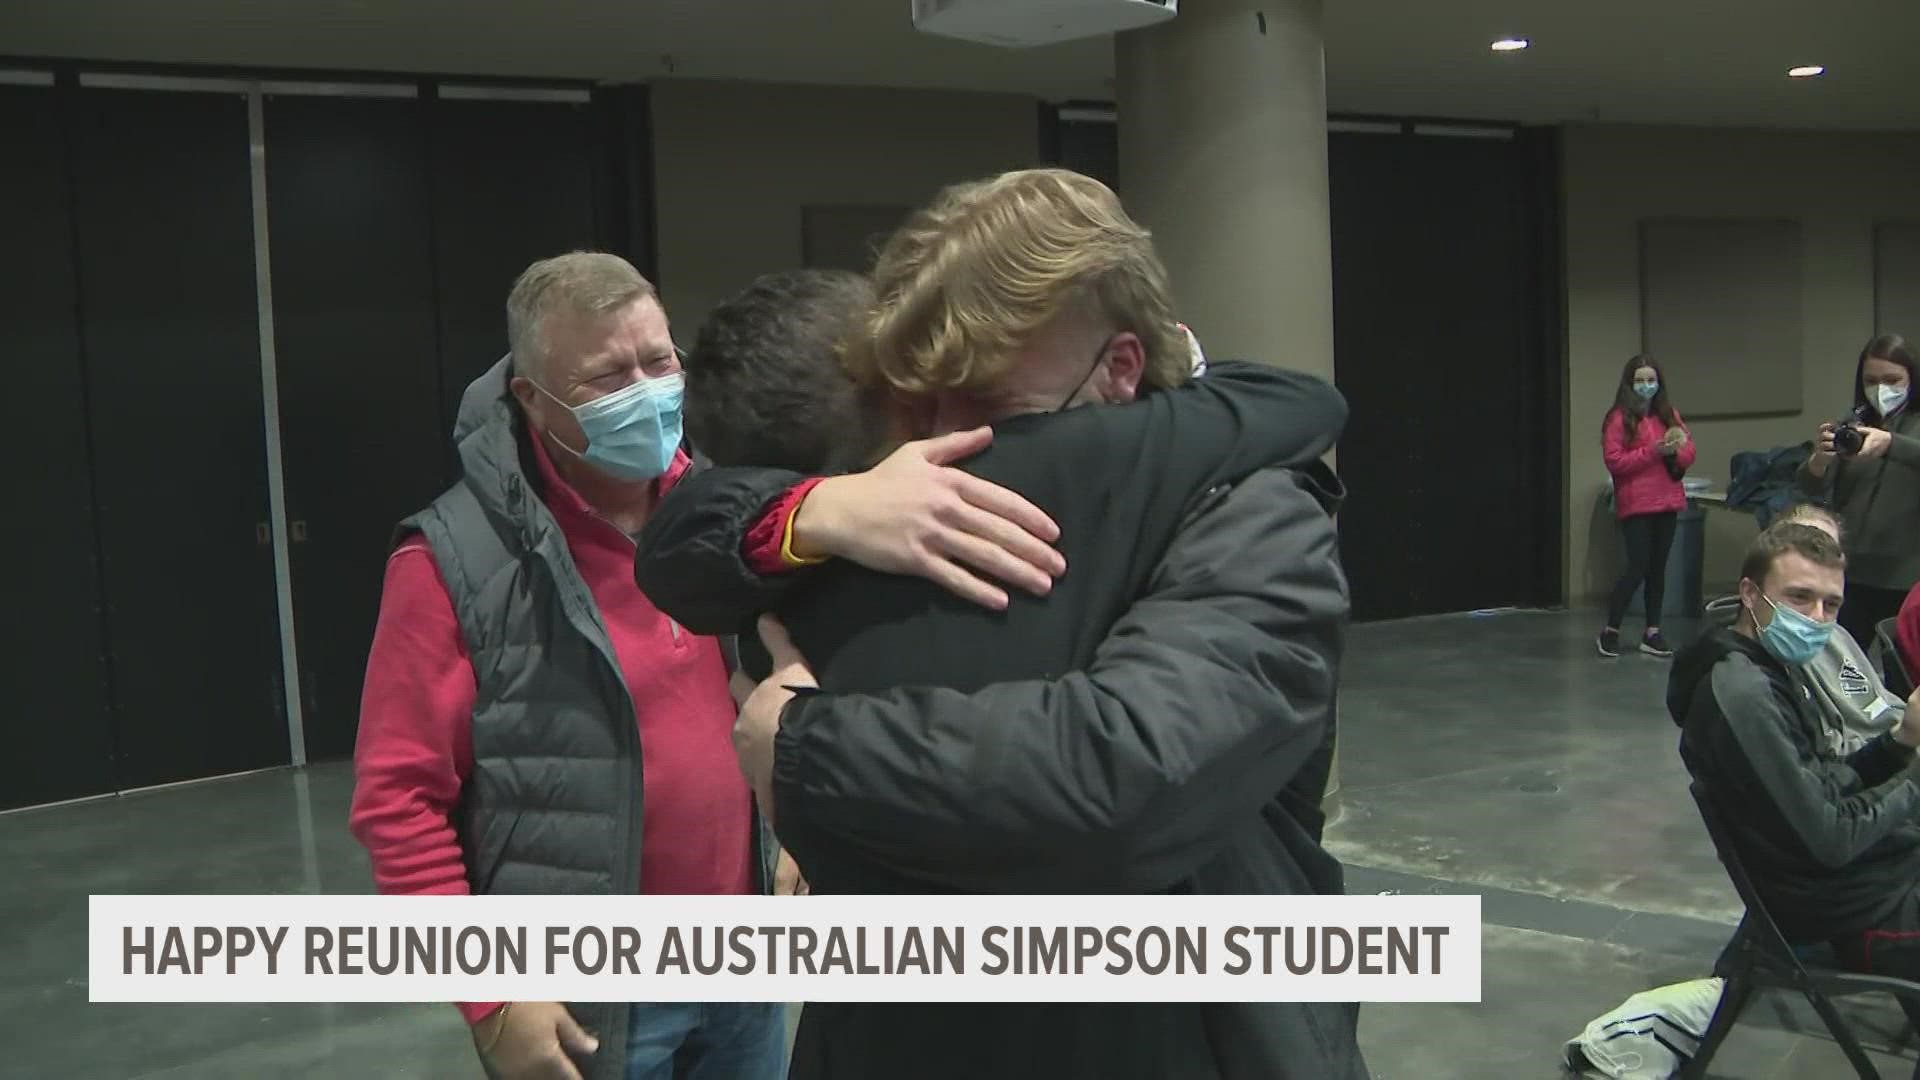 Simpson College student-athlete James Murray hadn't seen his parents since he left Australia in 2020, due to the pandemic.